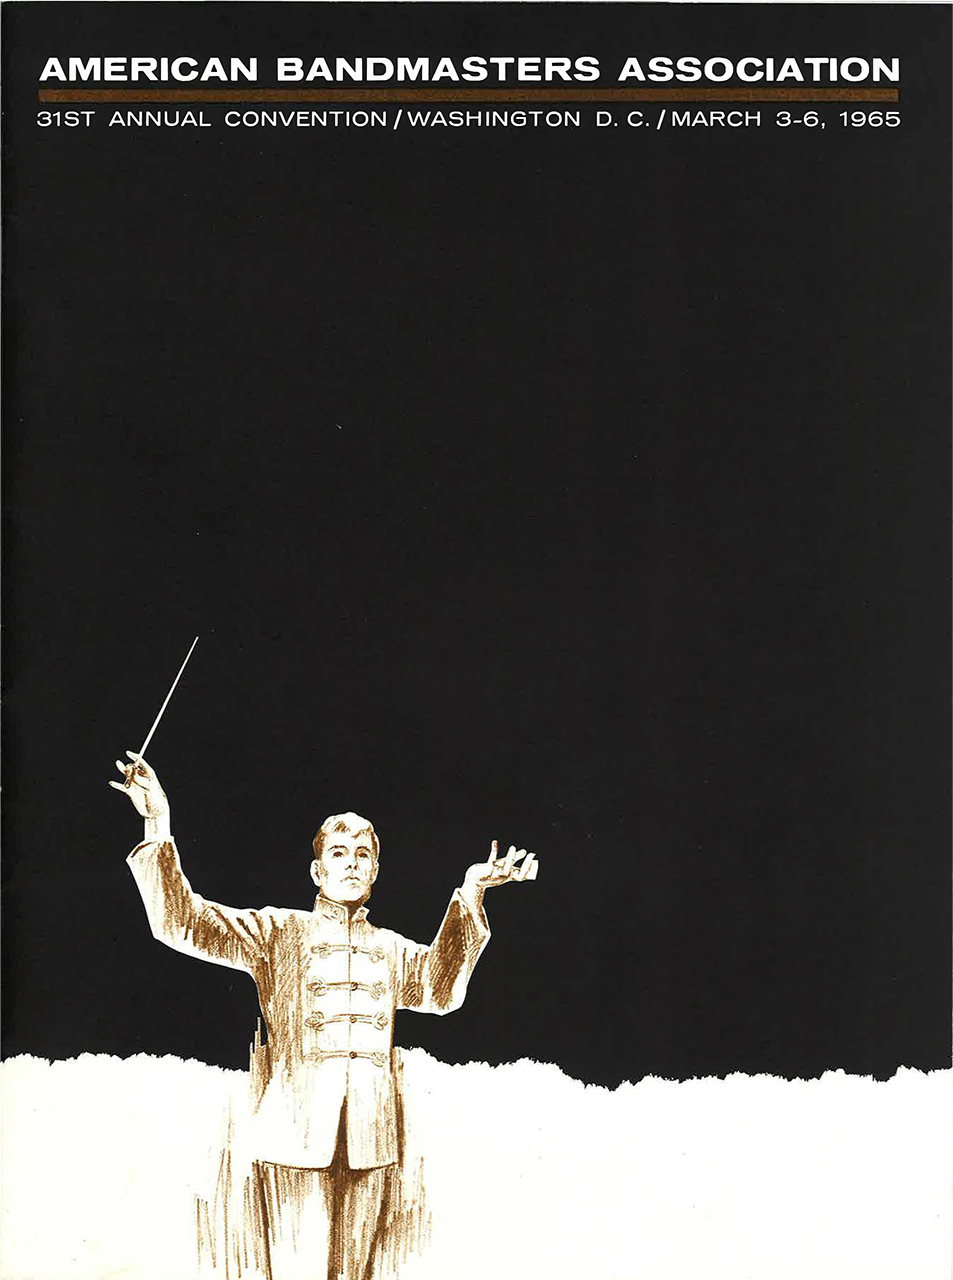 cover of 1965 convention program